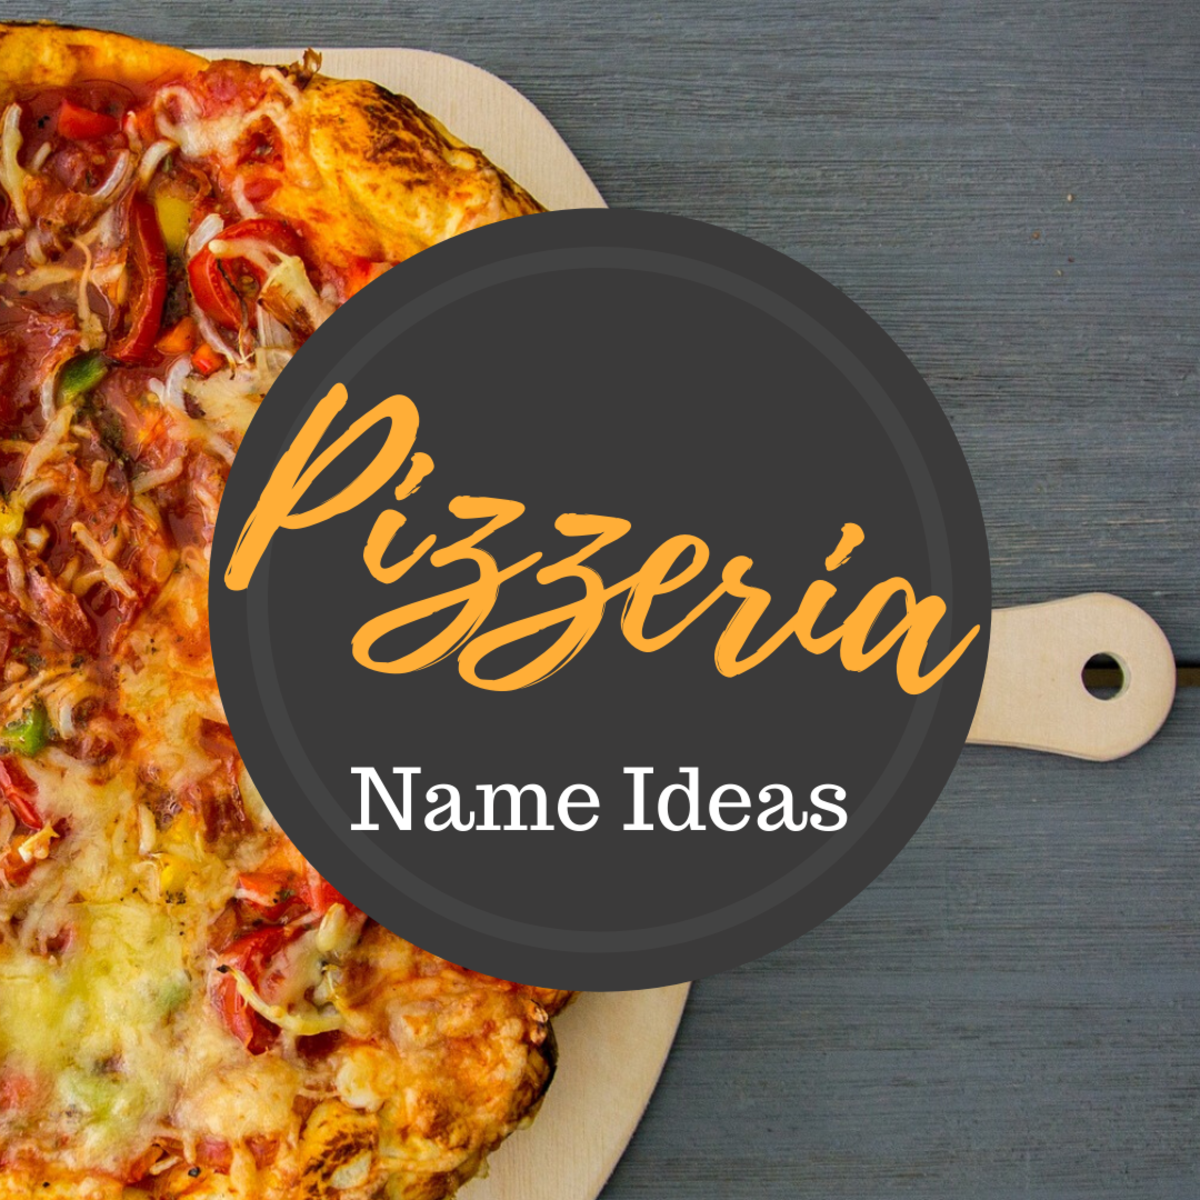 Find a list of creative, fun, funny, and punny names for your pizza restaurant.